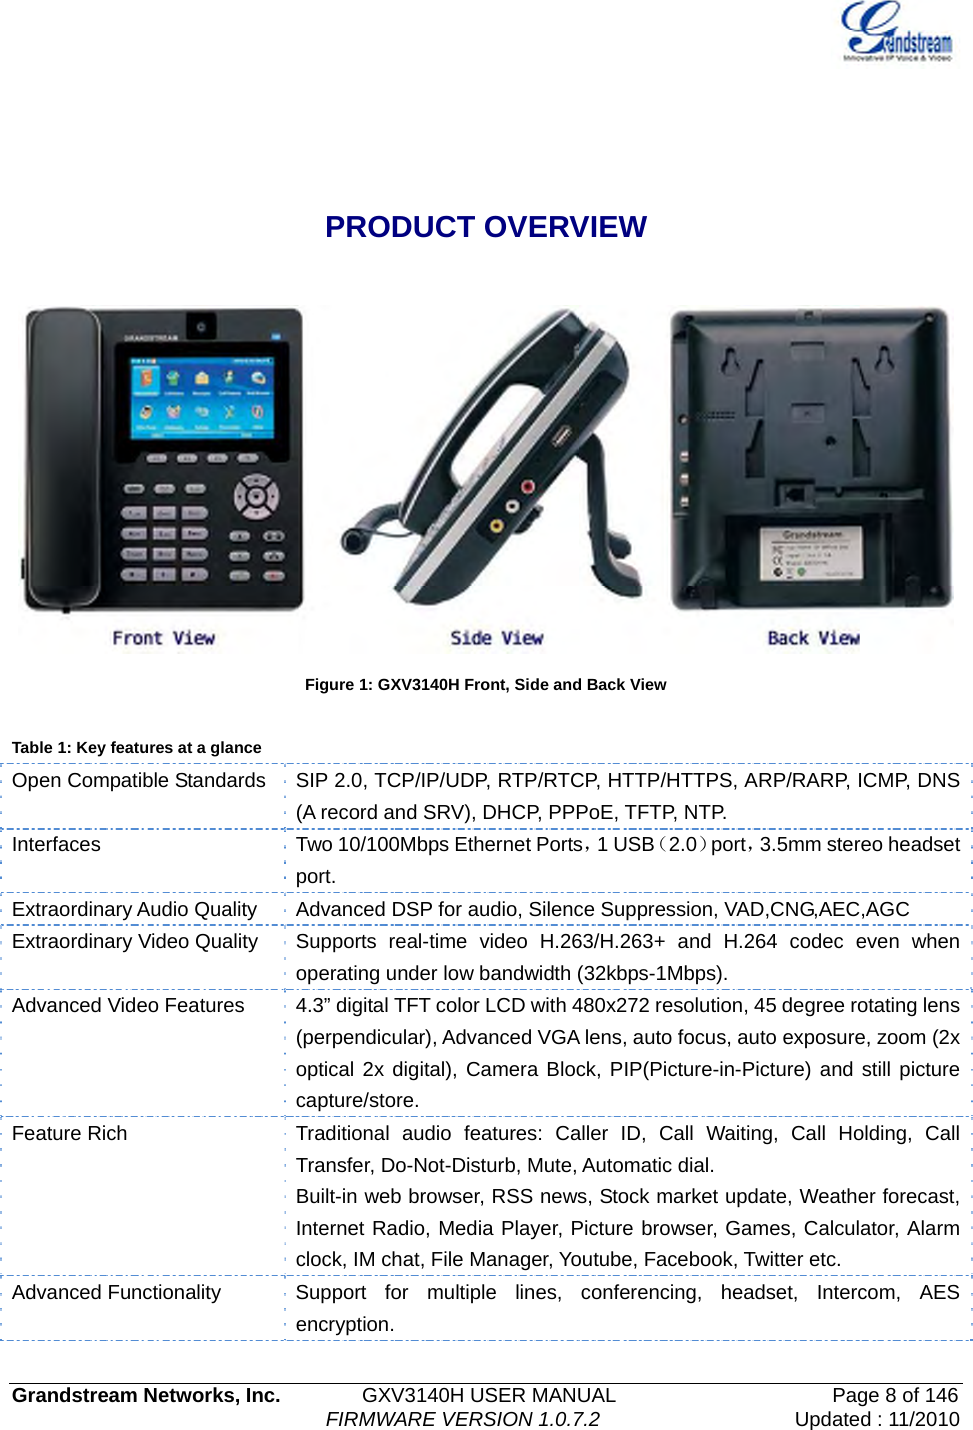   Grandstream Networks, Inc.        GXV3140H USER MANUAL                    Page 8 of 146                                FIRMWARE VERSION 1.0.7.2 Updated : 11/2010    PRODUCT OVERVIEW   Figure 1: GXV3140H Front, Side and Back View  Table 1: Key features at a glance Open Compatible Standards  SIP 2.0, TCP/IP/UDP, RTP/RTCP, HTTP/HTTPS, ARP/RARP, ICMP, DNS (A record and SRV), DHCP, PPPoE, TFTP, NTP. Interfaces  Two 10/100Mbps Ethernet Ports，1 USB（2.0）port，3.5mm stereo headset port. Extraordinary Audio Quality  Advanced DSP for audio, Silence Suppression, VAD,CNG,AEC,AGC Extraordinary Video Quality  Supports real-time video H.263/H.263+ and H.264 codec even when operating under low bandwidth (32kbps-1Mbps). Advanced Video Features  4.3” digital TFT color LCD with 480x272 resolution, 45 degree rotating lens (perpendicular), Advanced VGA lens, auto focus, auto exposure, zoom (2x optical 2x digital), Camera Block, PIP(Picture-in-Picture) and still picture capture/store. Feature Rich  Traditional  audio  features:  Caller ID, Call Waiting, Call Holding, Call Transfer, Do-Not-Disturb, Mute, Automatic dial.   Built-in web browser, RSS news, Stock market update, Weather forecast, Internet Radio, Media Player, Picture browser, Games, Calculator, Alarm clock, IM chat, File Manager, Youtube, Facebook, Twitter etc. Advanced Functionality  Support for multiple lines, conferencing, headset, Intercom, AES encryption. 